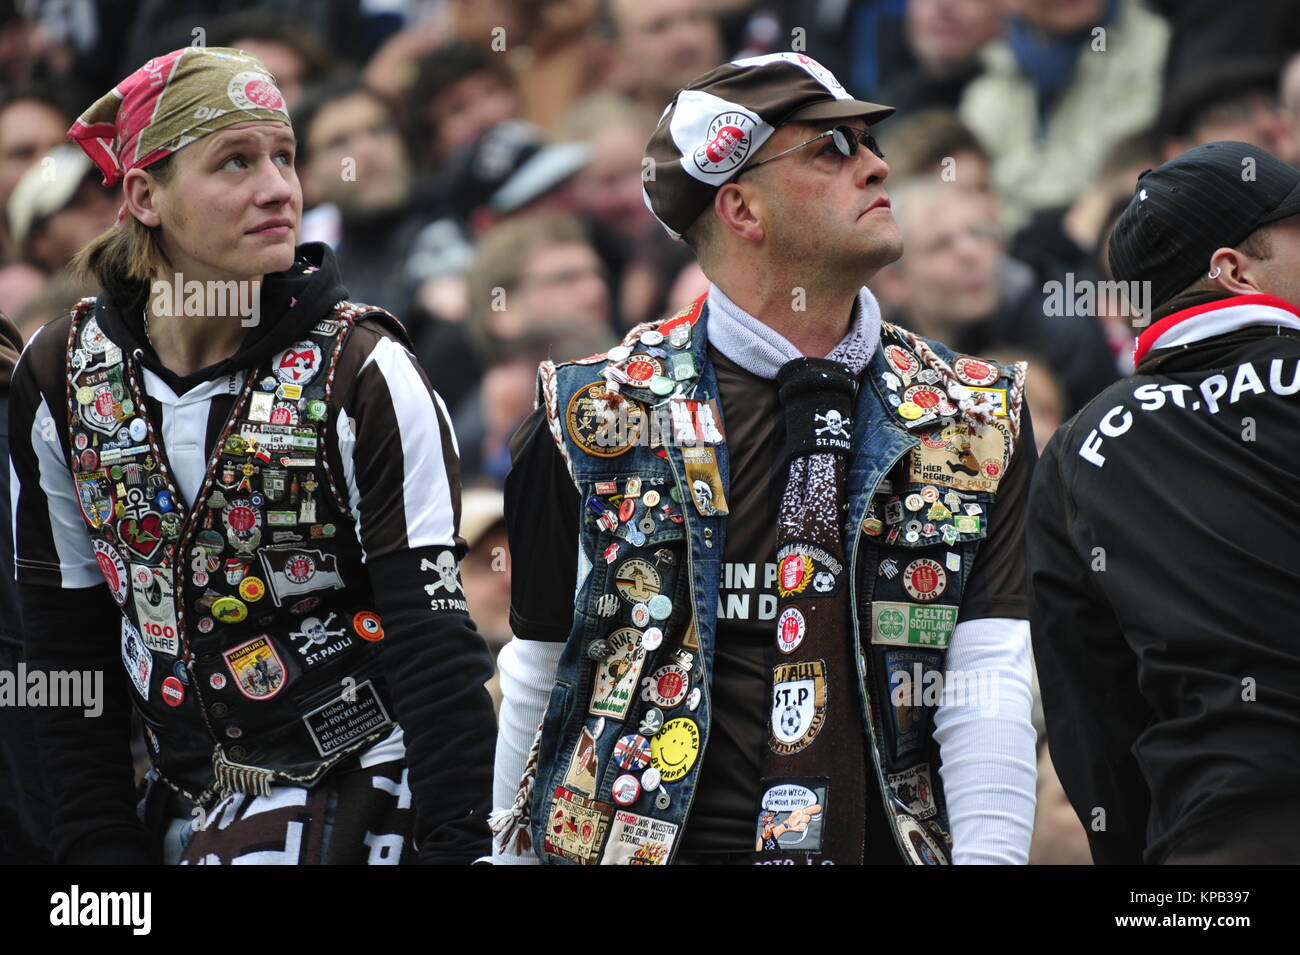 St pauli fans hi-res stock photography and images - Alamy